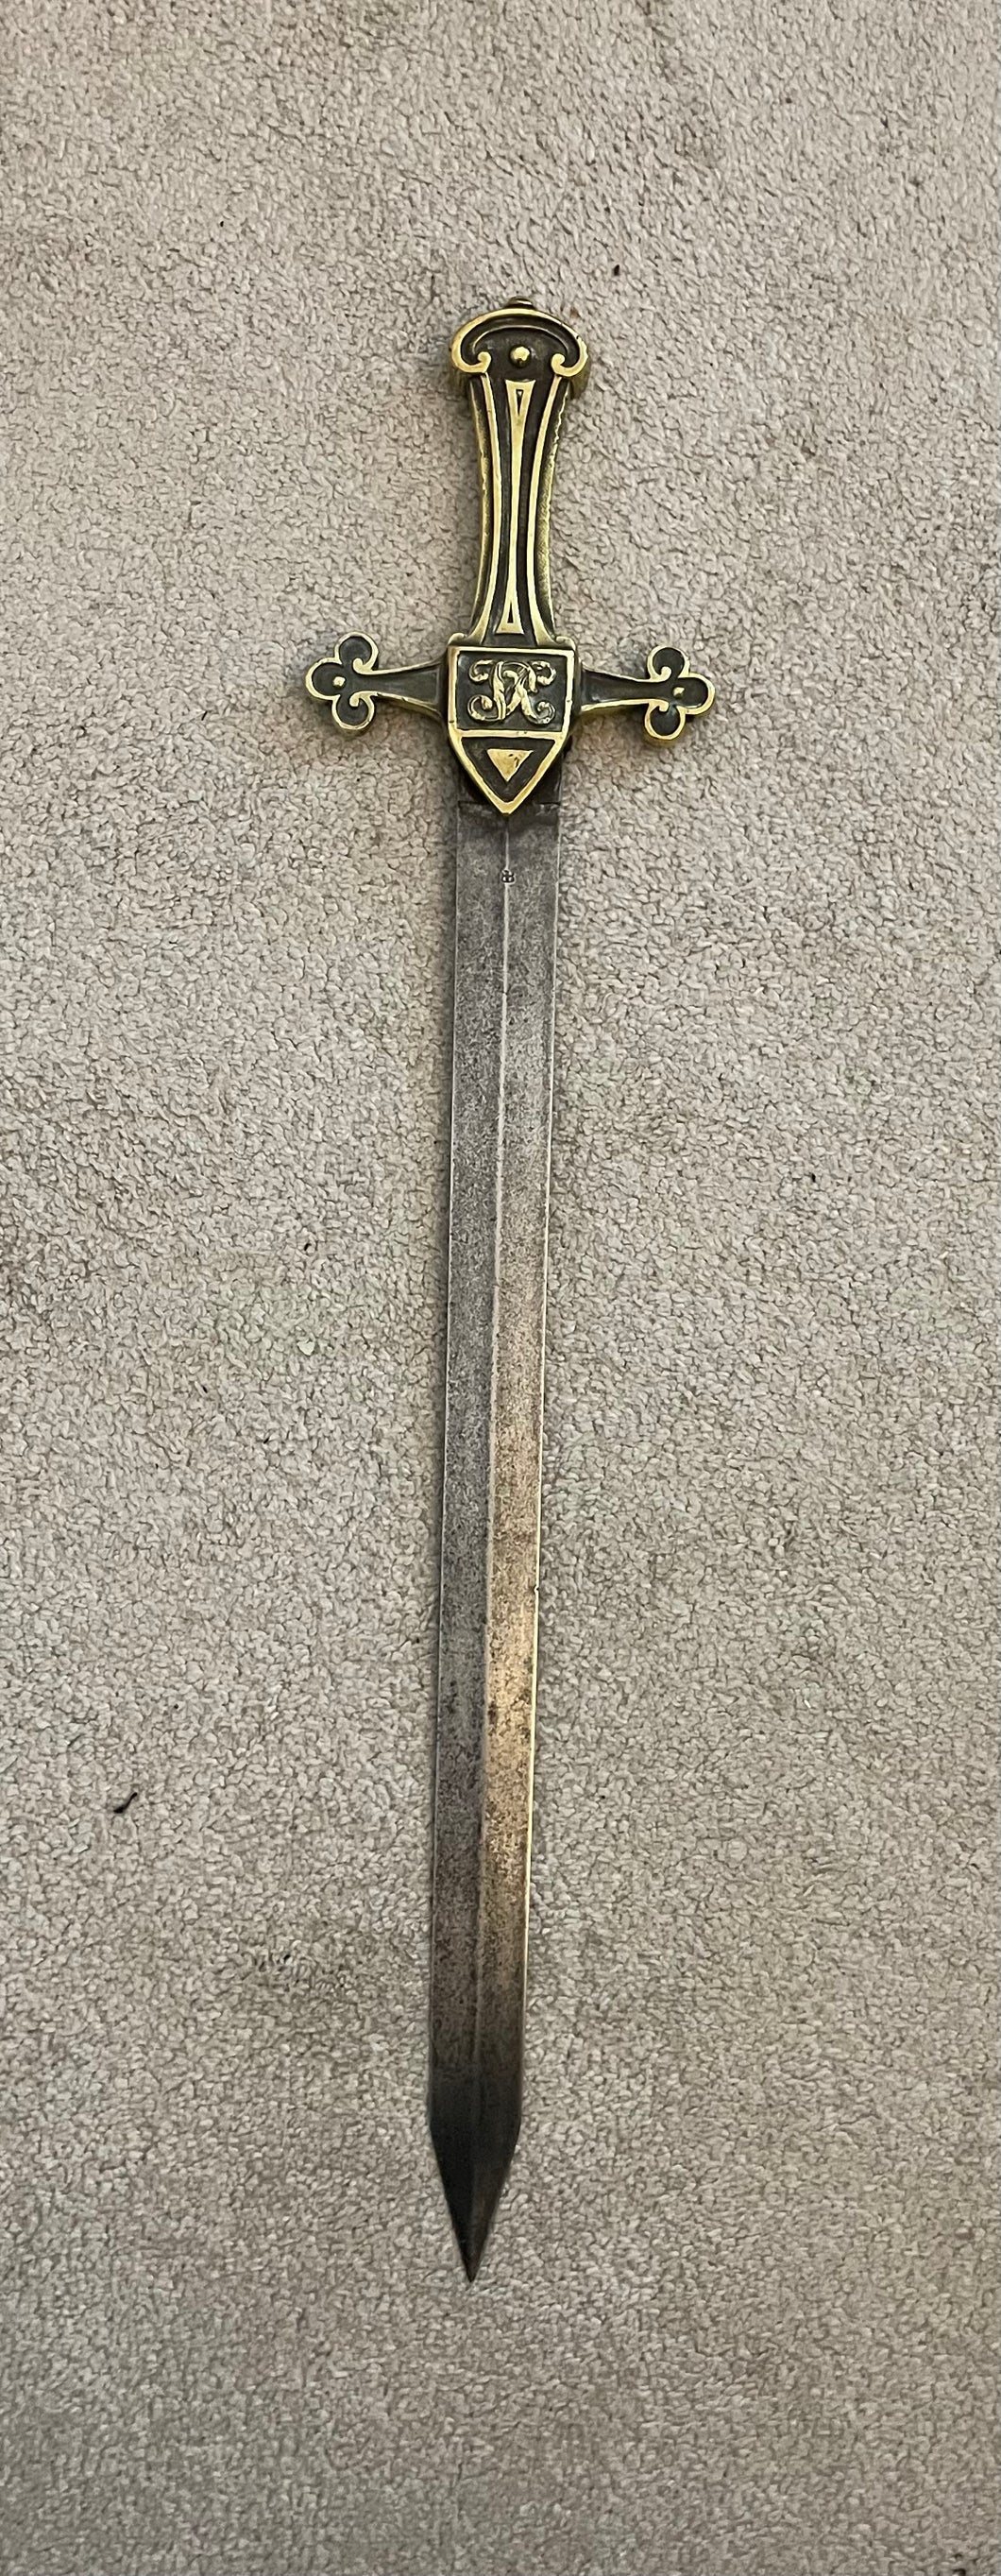 1856 Pattern Drummers' Sword, Robert Mole & Sons Produced